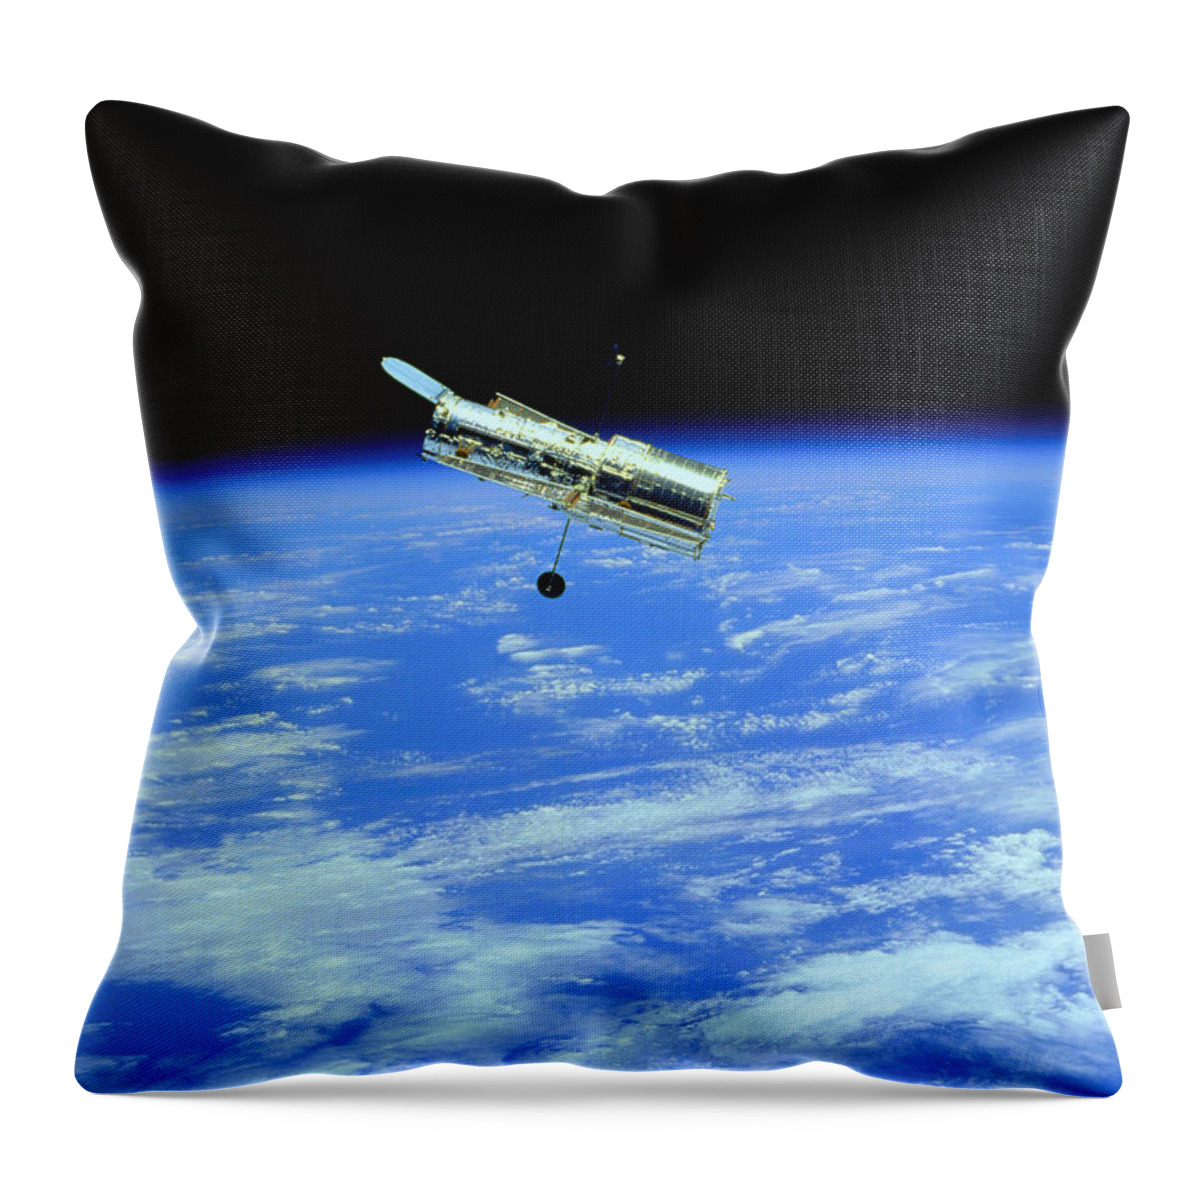 Hubble Throw Pillow featuring the photograph Hubble Space Telescope by Ram Vasudev